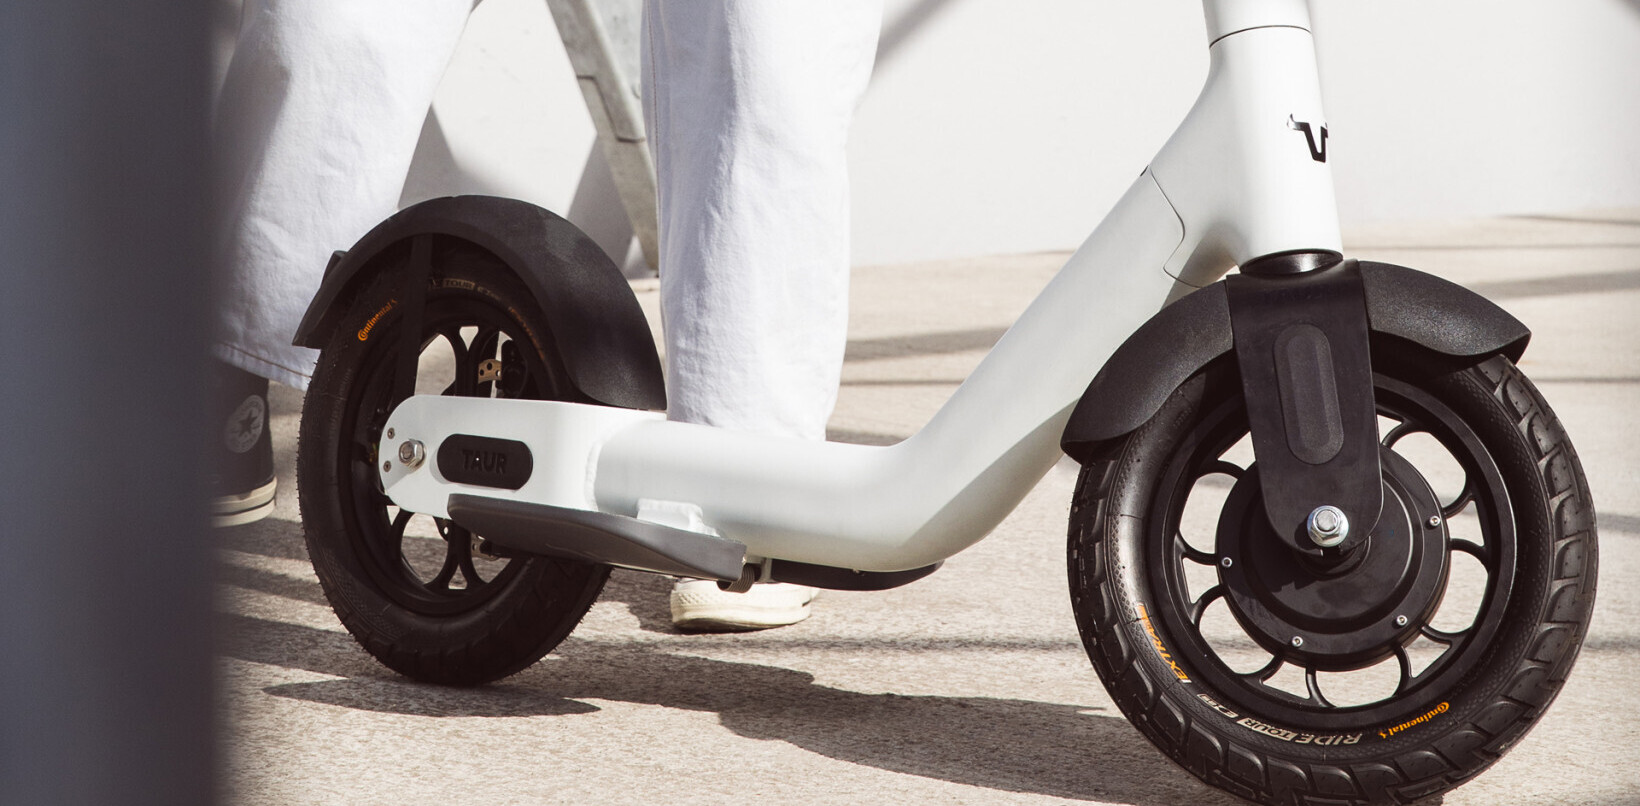 The Taur electric scooter prioritizes safety with giant tires and a forward riding position